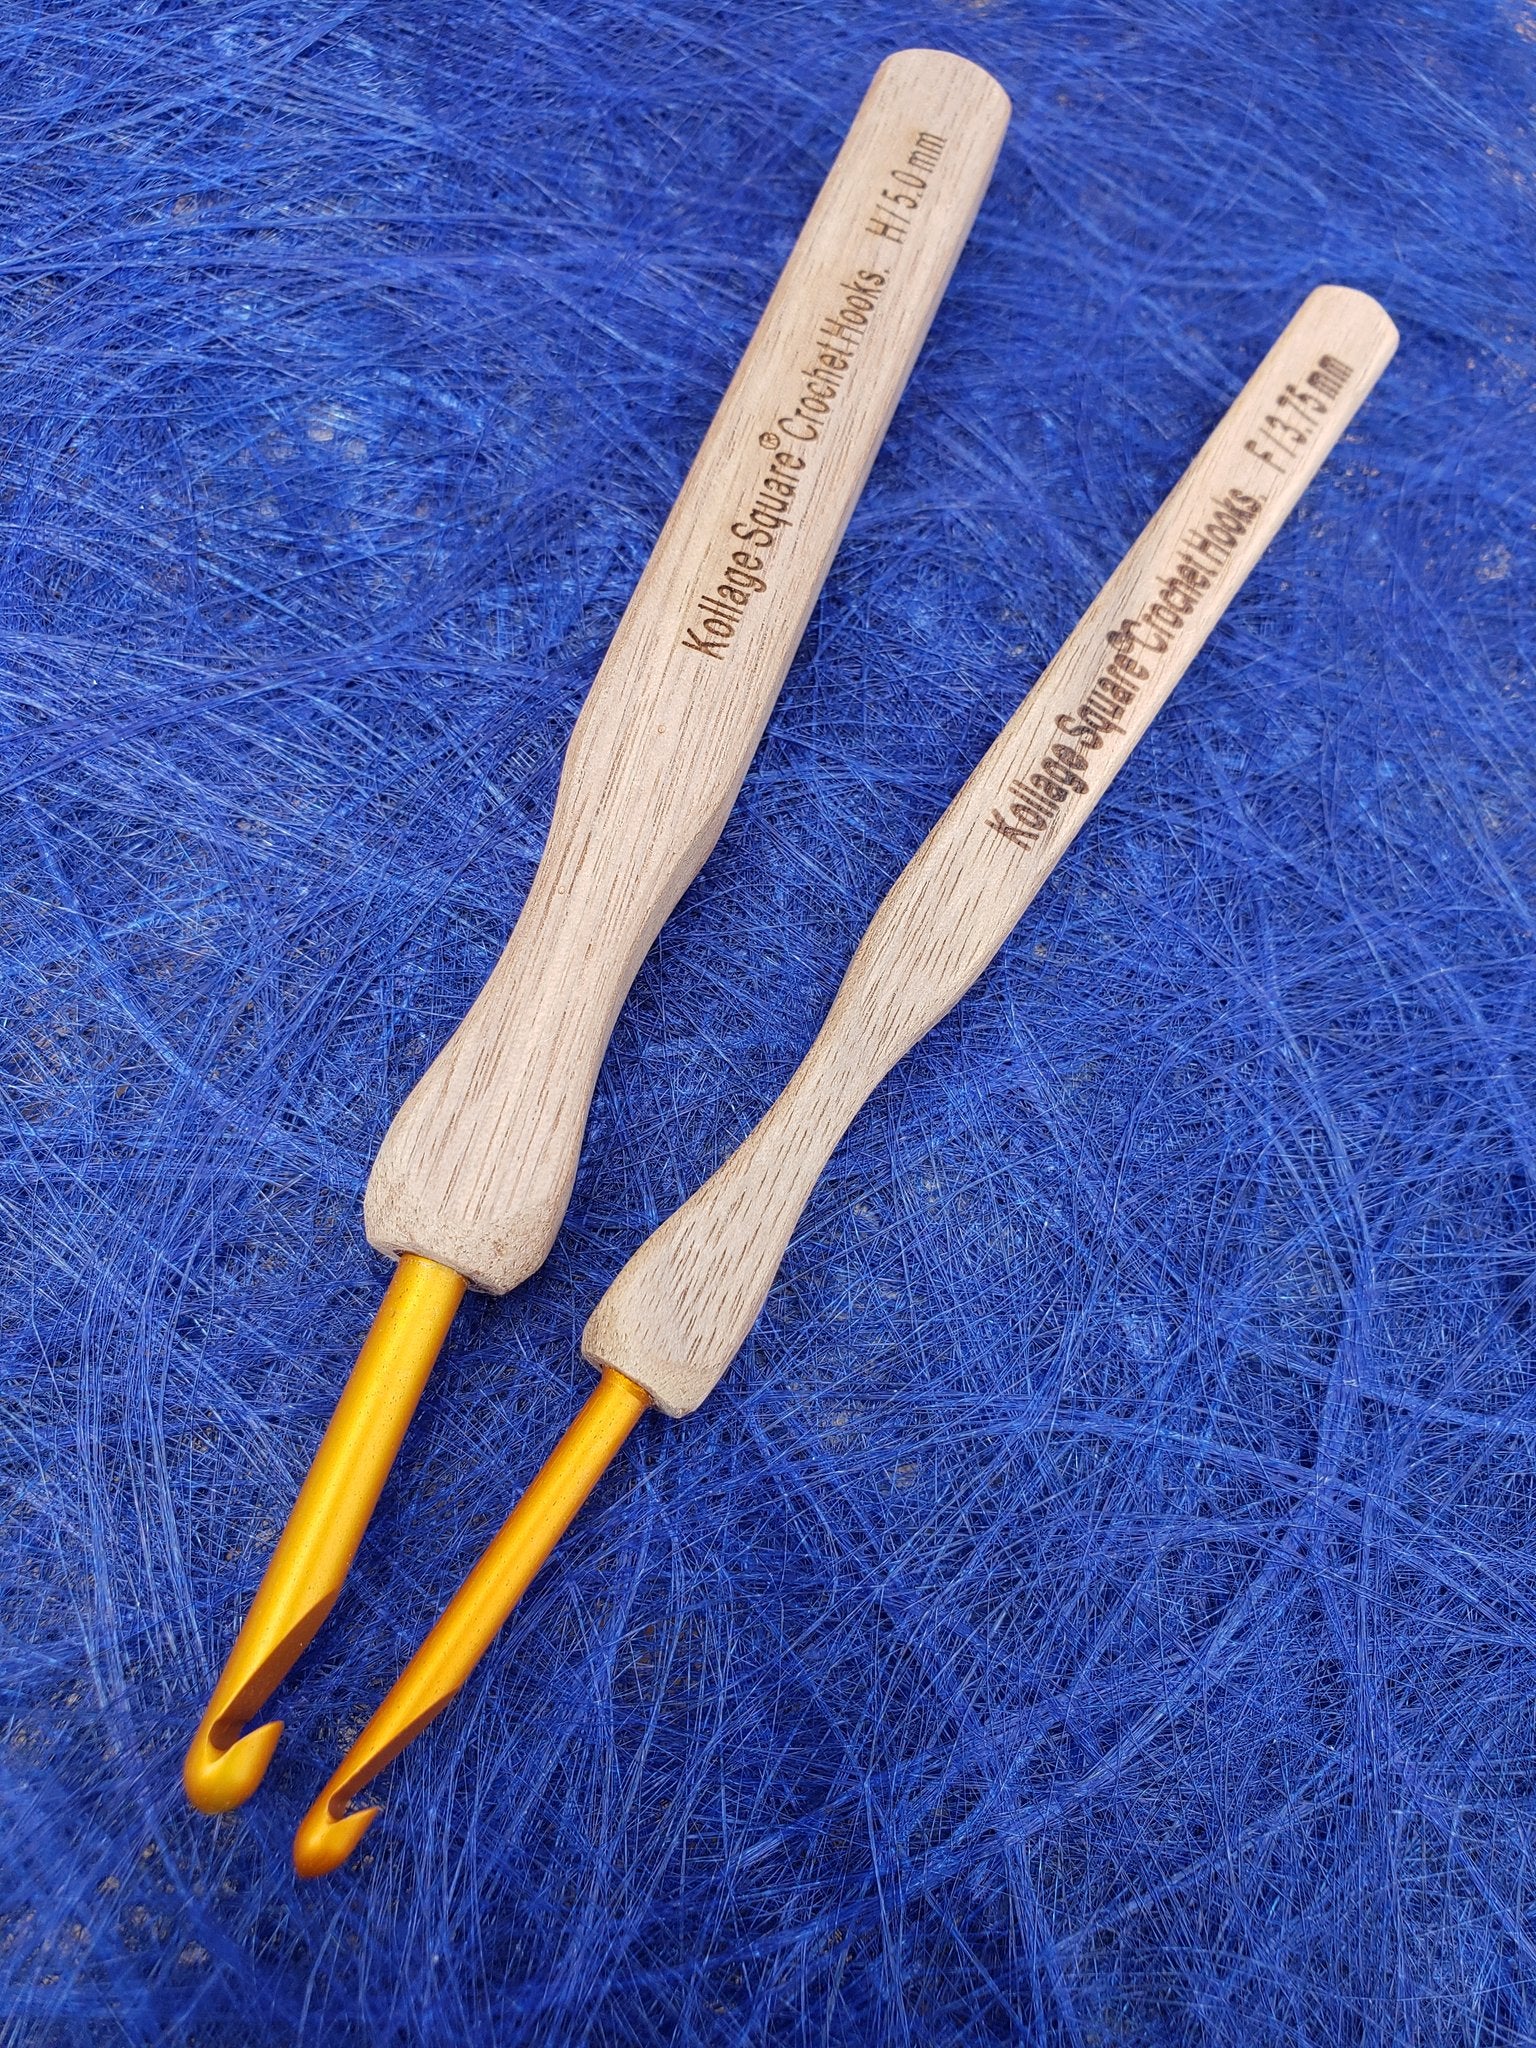 SQUARE™ Crochet Hooks – Perfectly Knotted